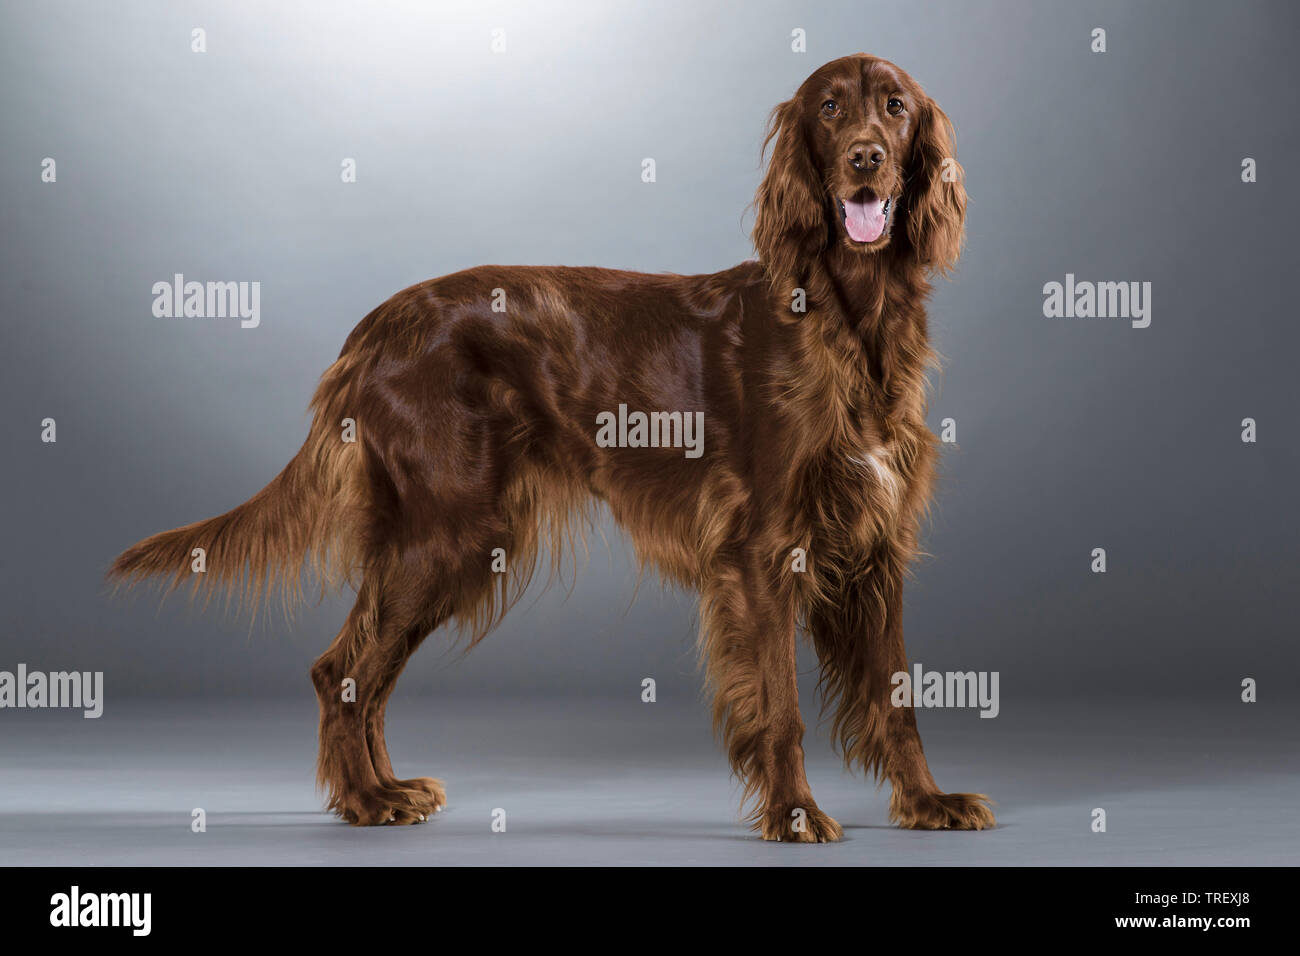 Irish Setter. Adult dog standing, seen side-on. Studio picture against a gray background. Germany Stock Photo